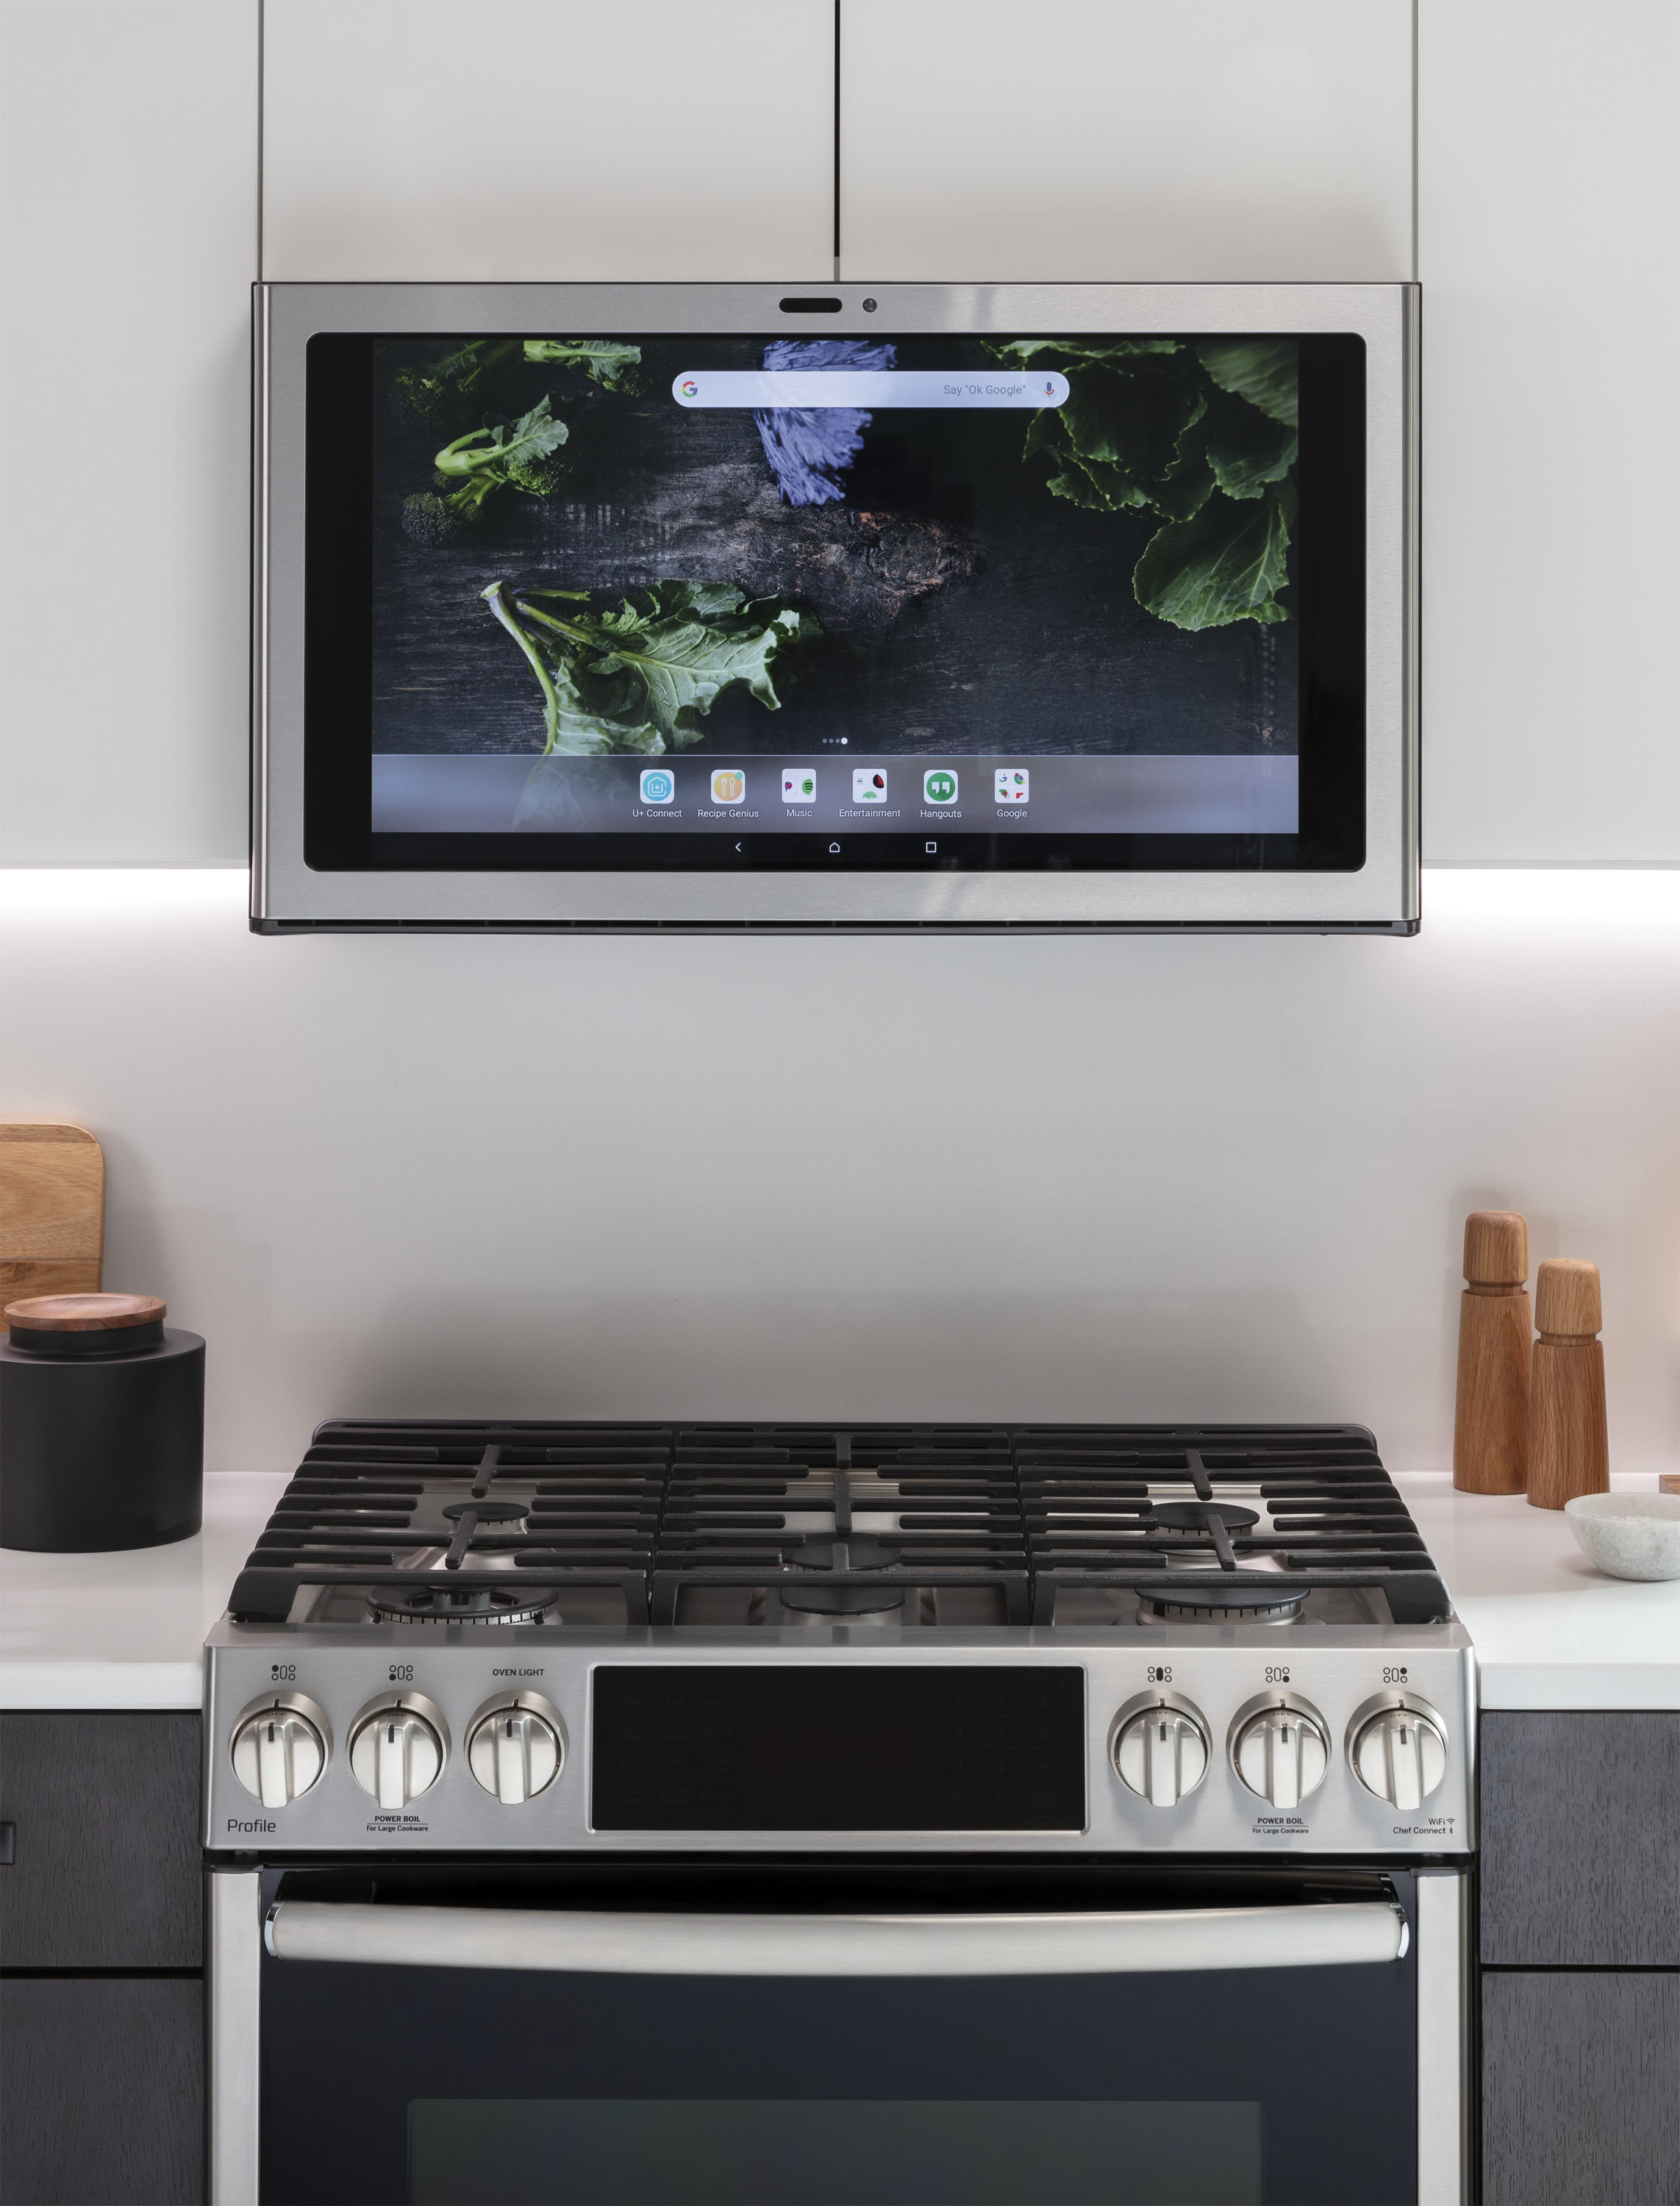 Ge Appliances Reveals The New Heartbeat Of The Connected Home Business Wire